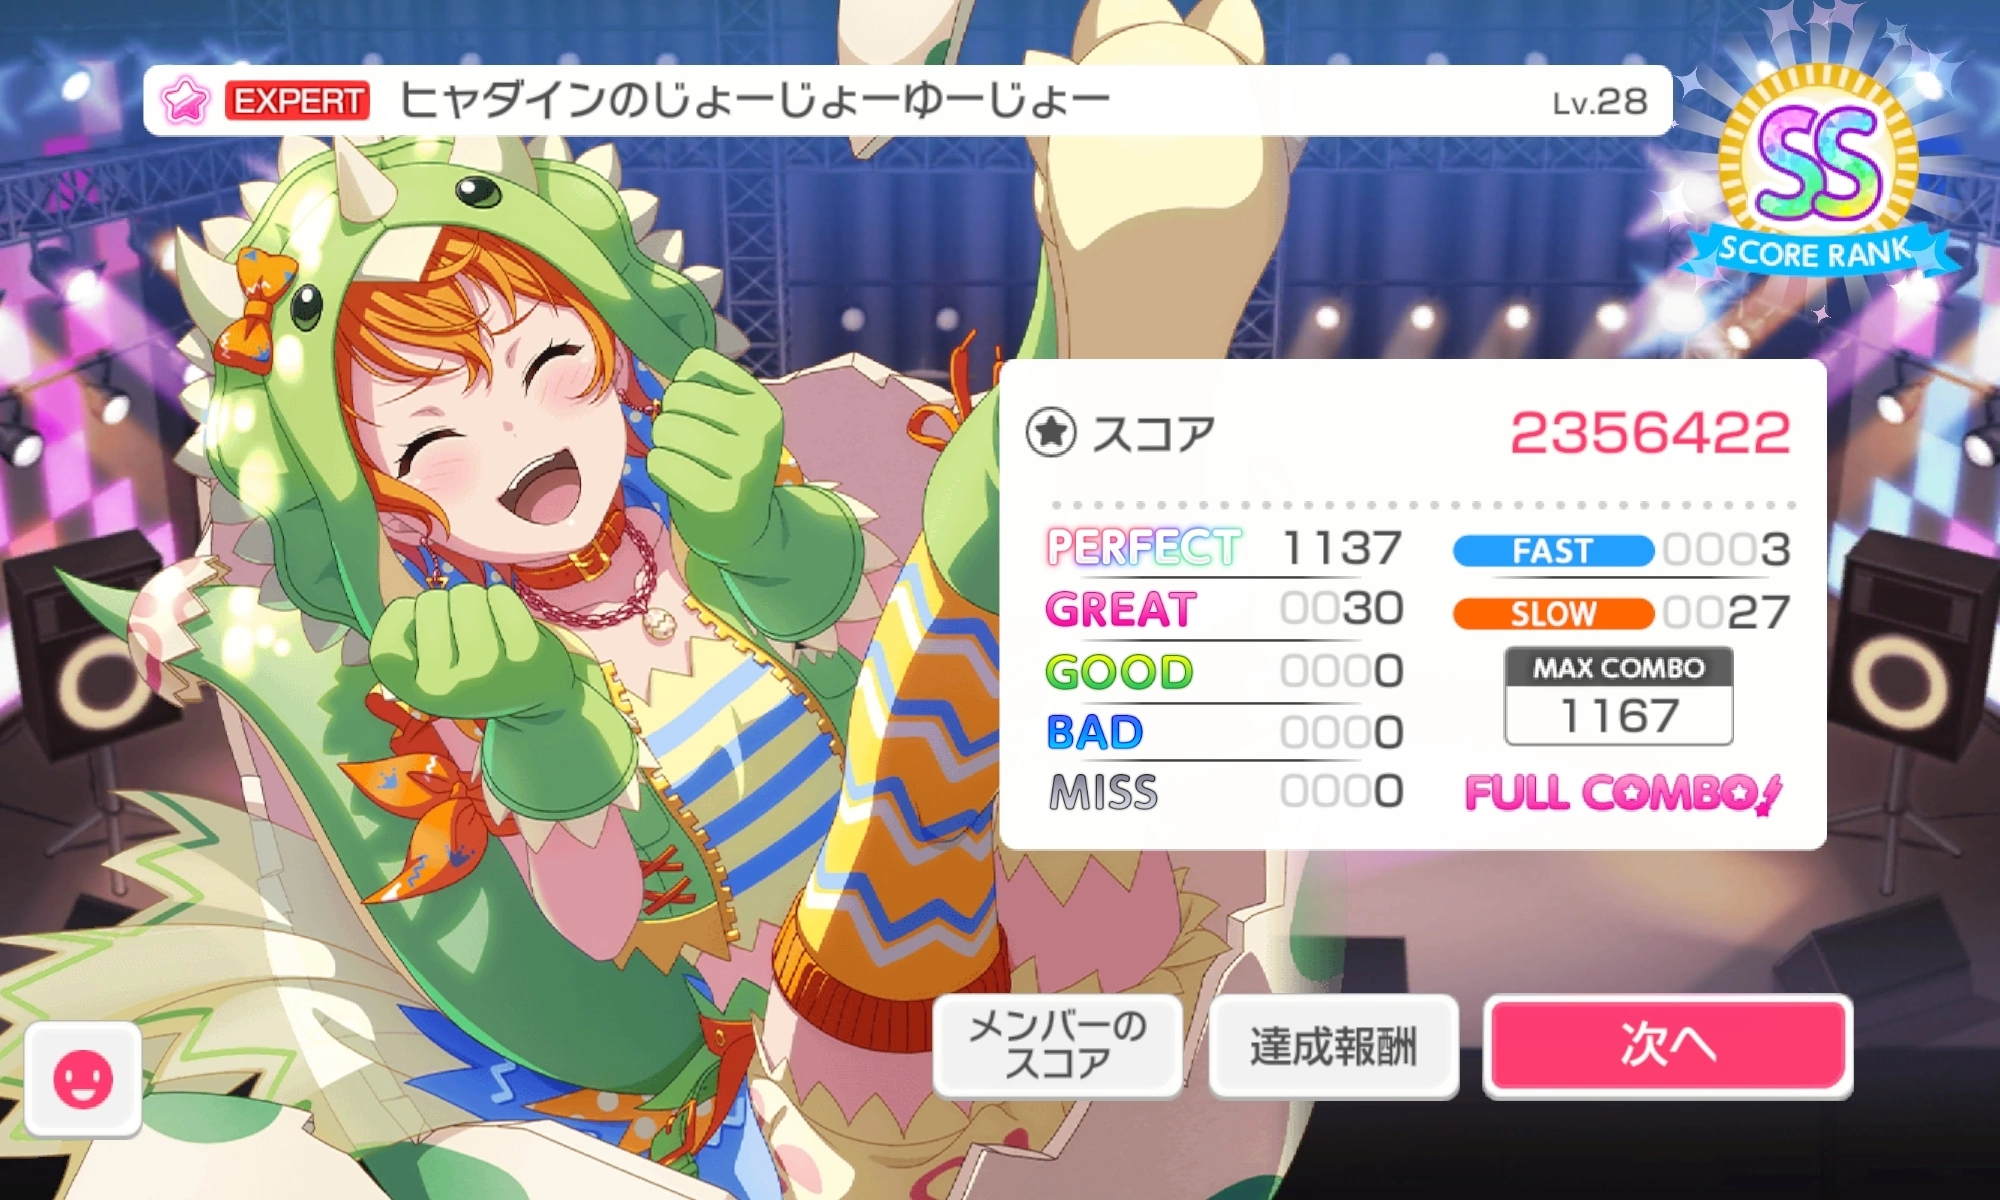 I finally full combo'ed this song from hell😭
Glad I can play bandori. Maybe there is someone who...